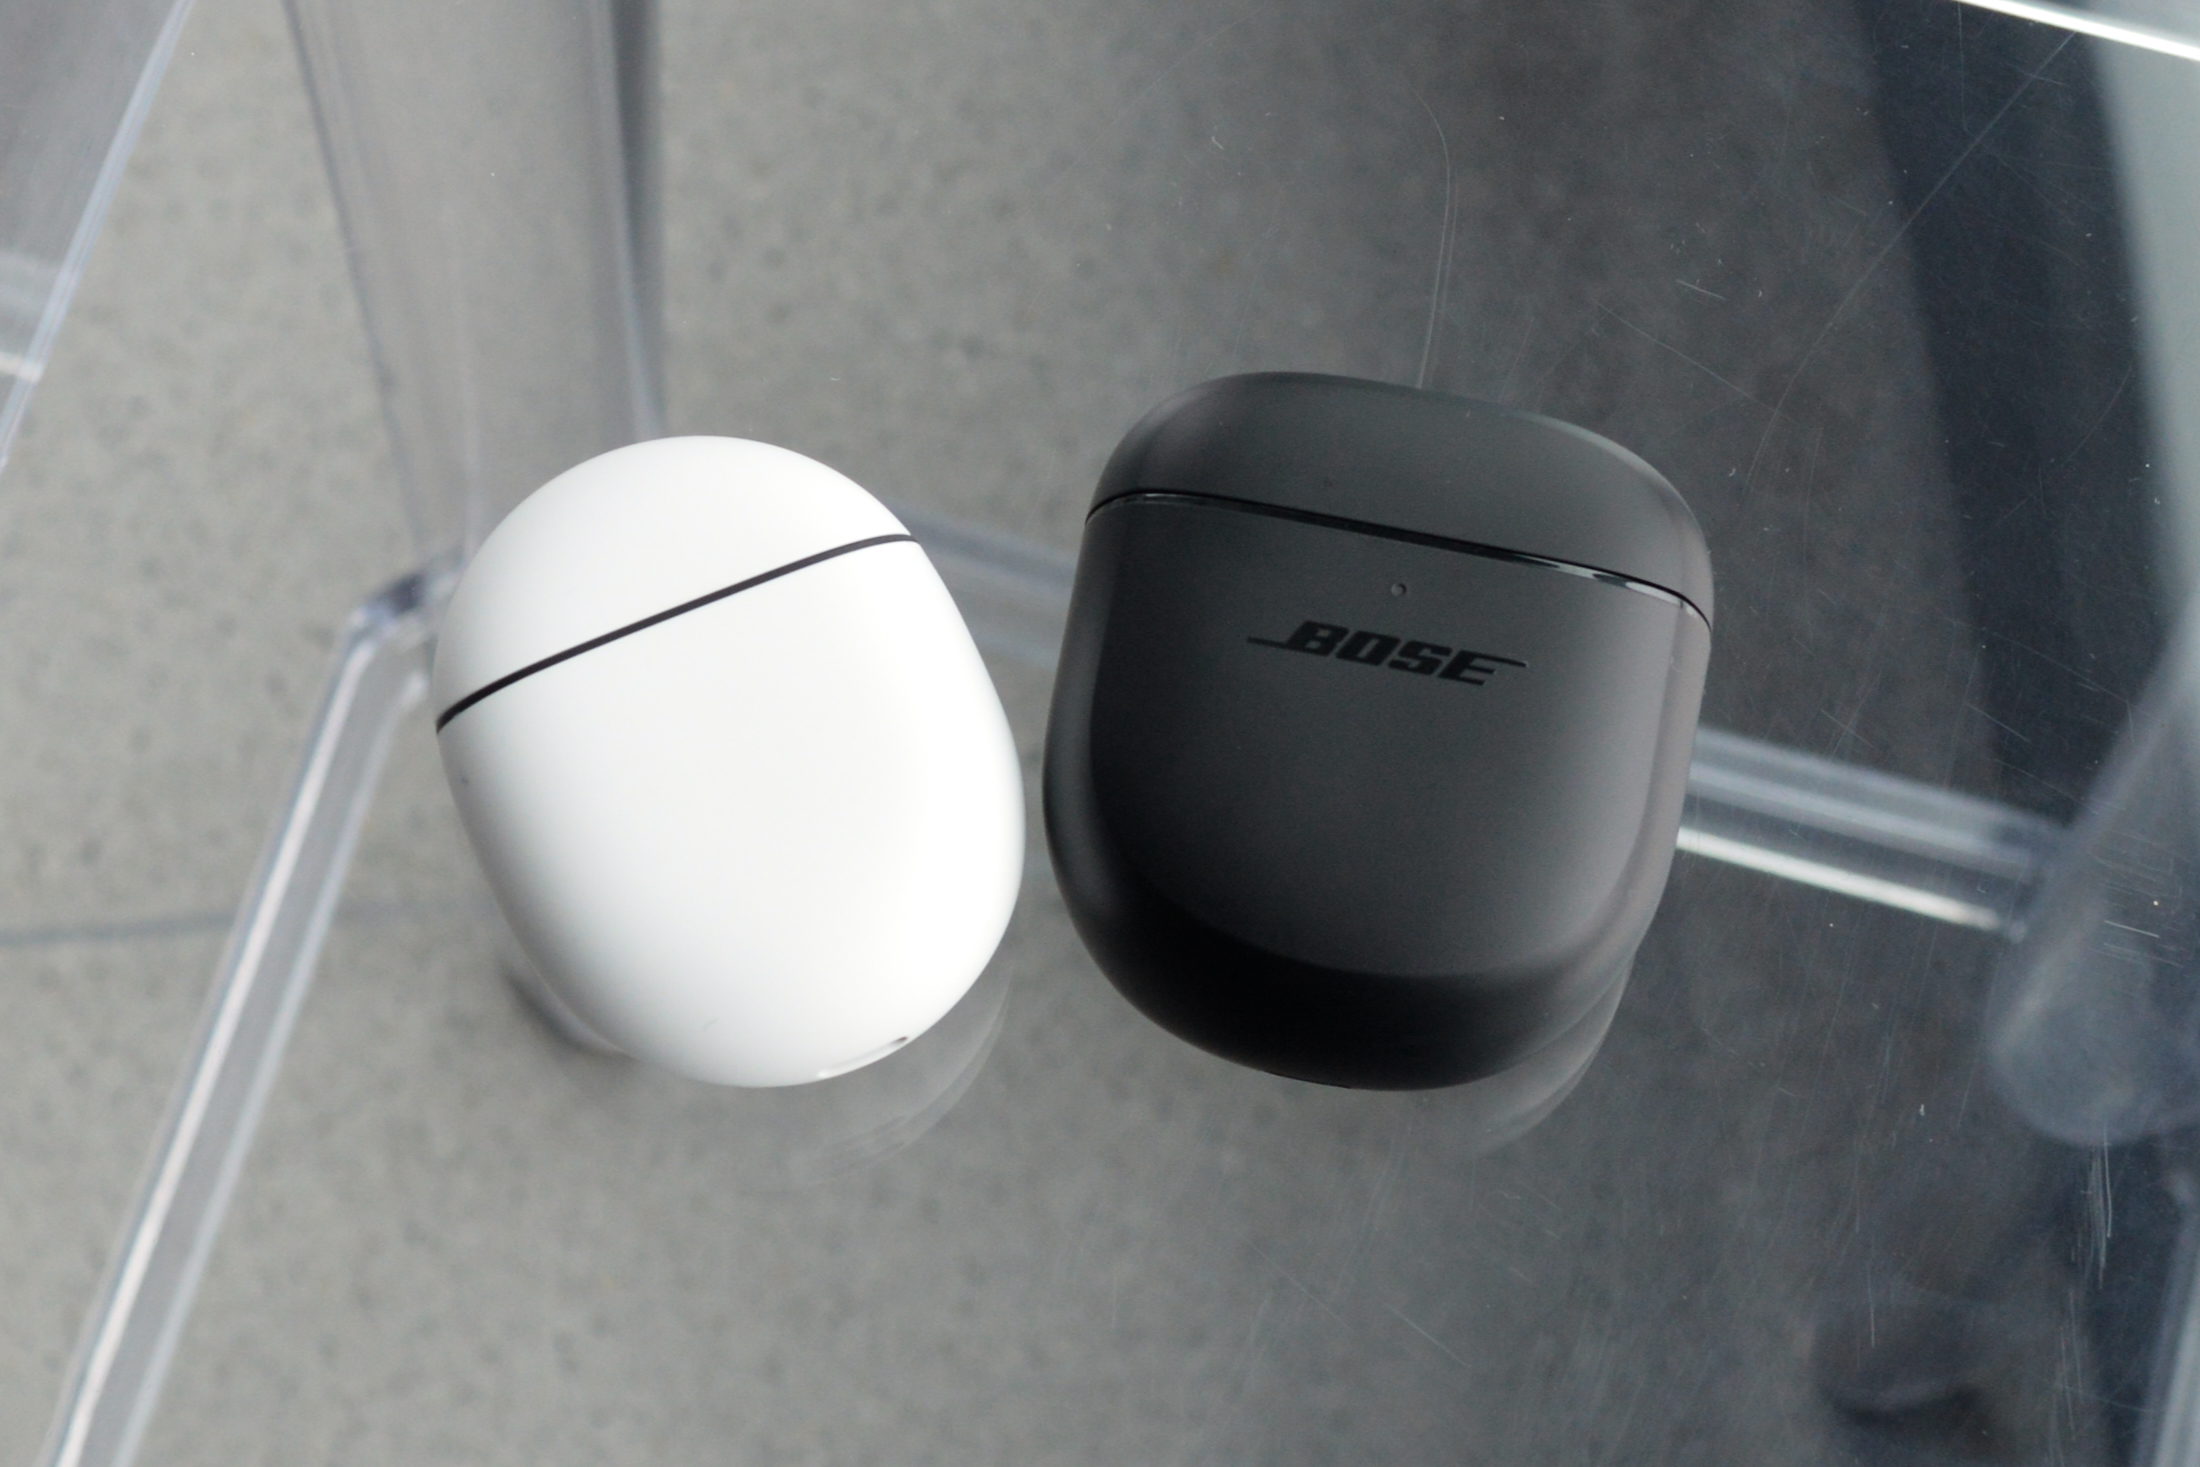 Bose QuietComfort Earbuds II charging case seen next to a Google Pixel Buds Pro charging case for scale.